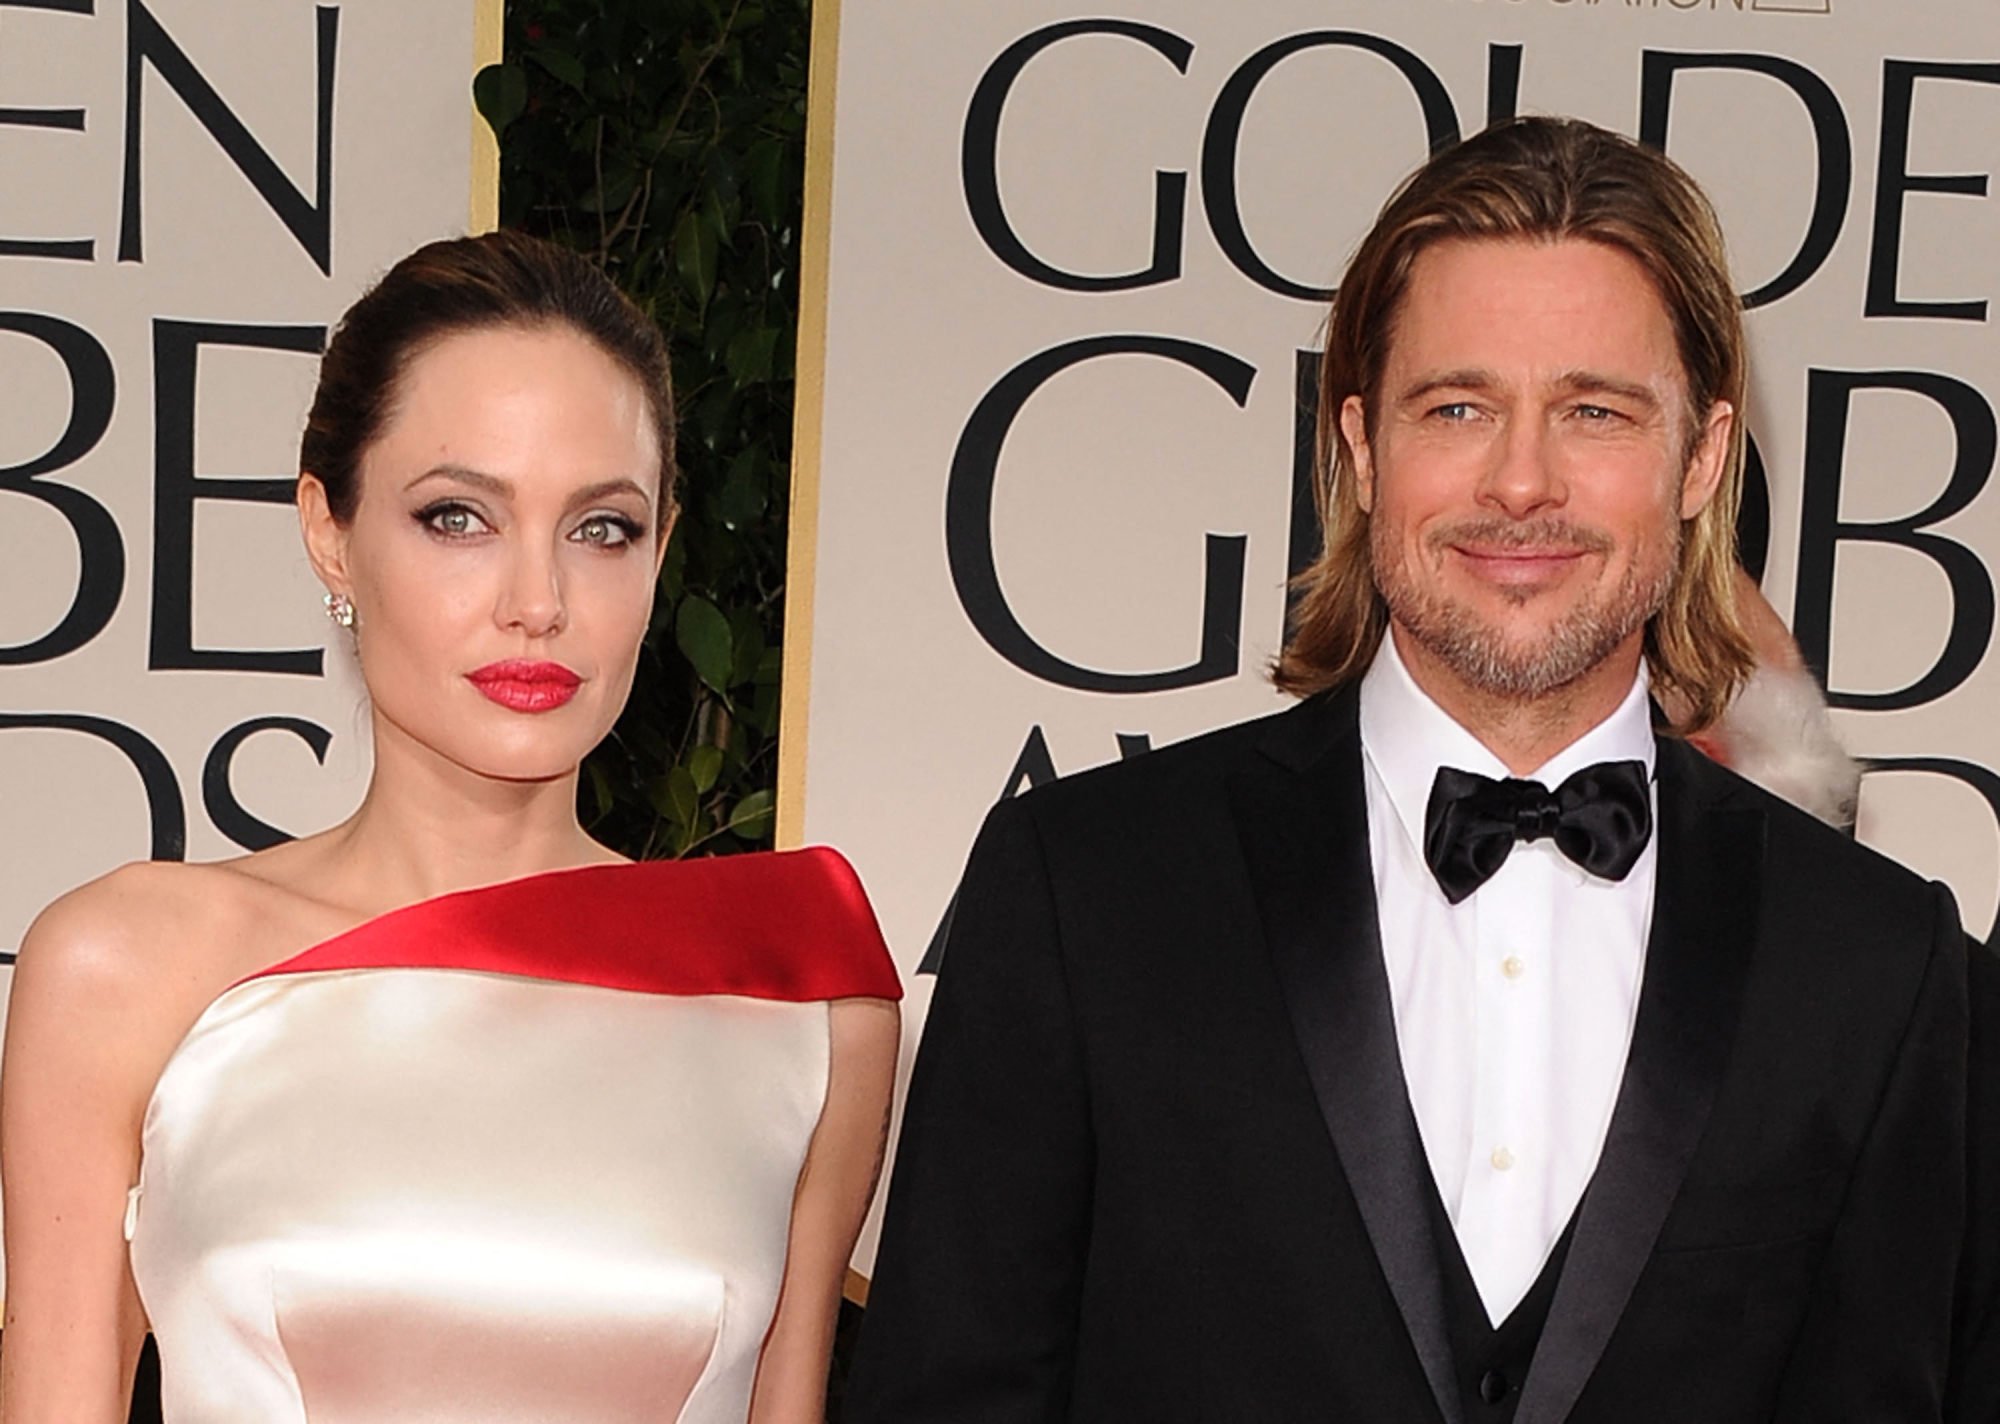 Where are Angelina Jolie and Brad Pitt's 6 children now in 2022